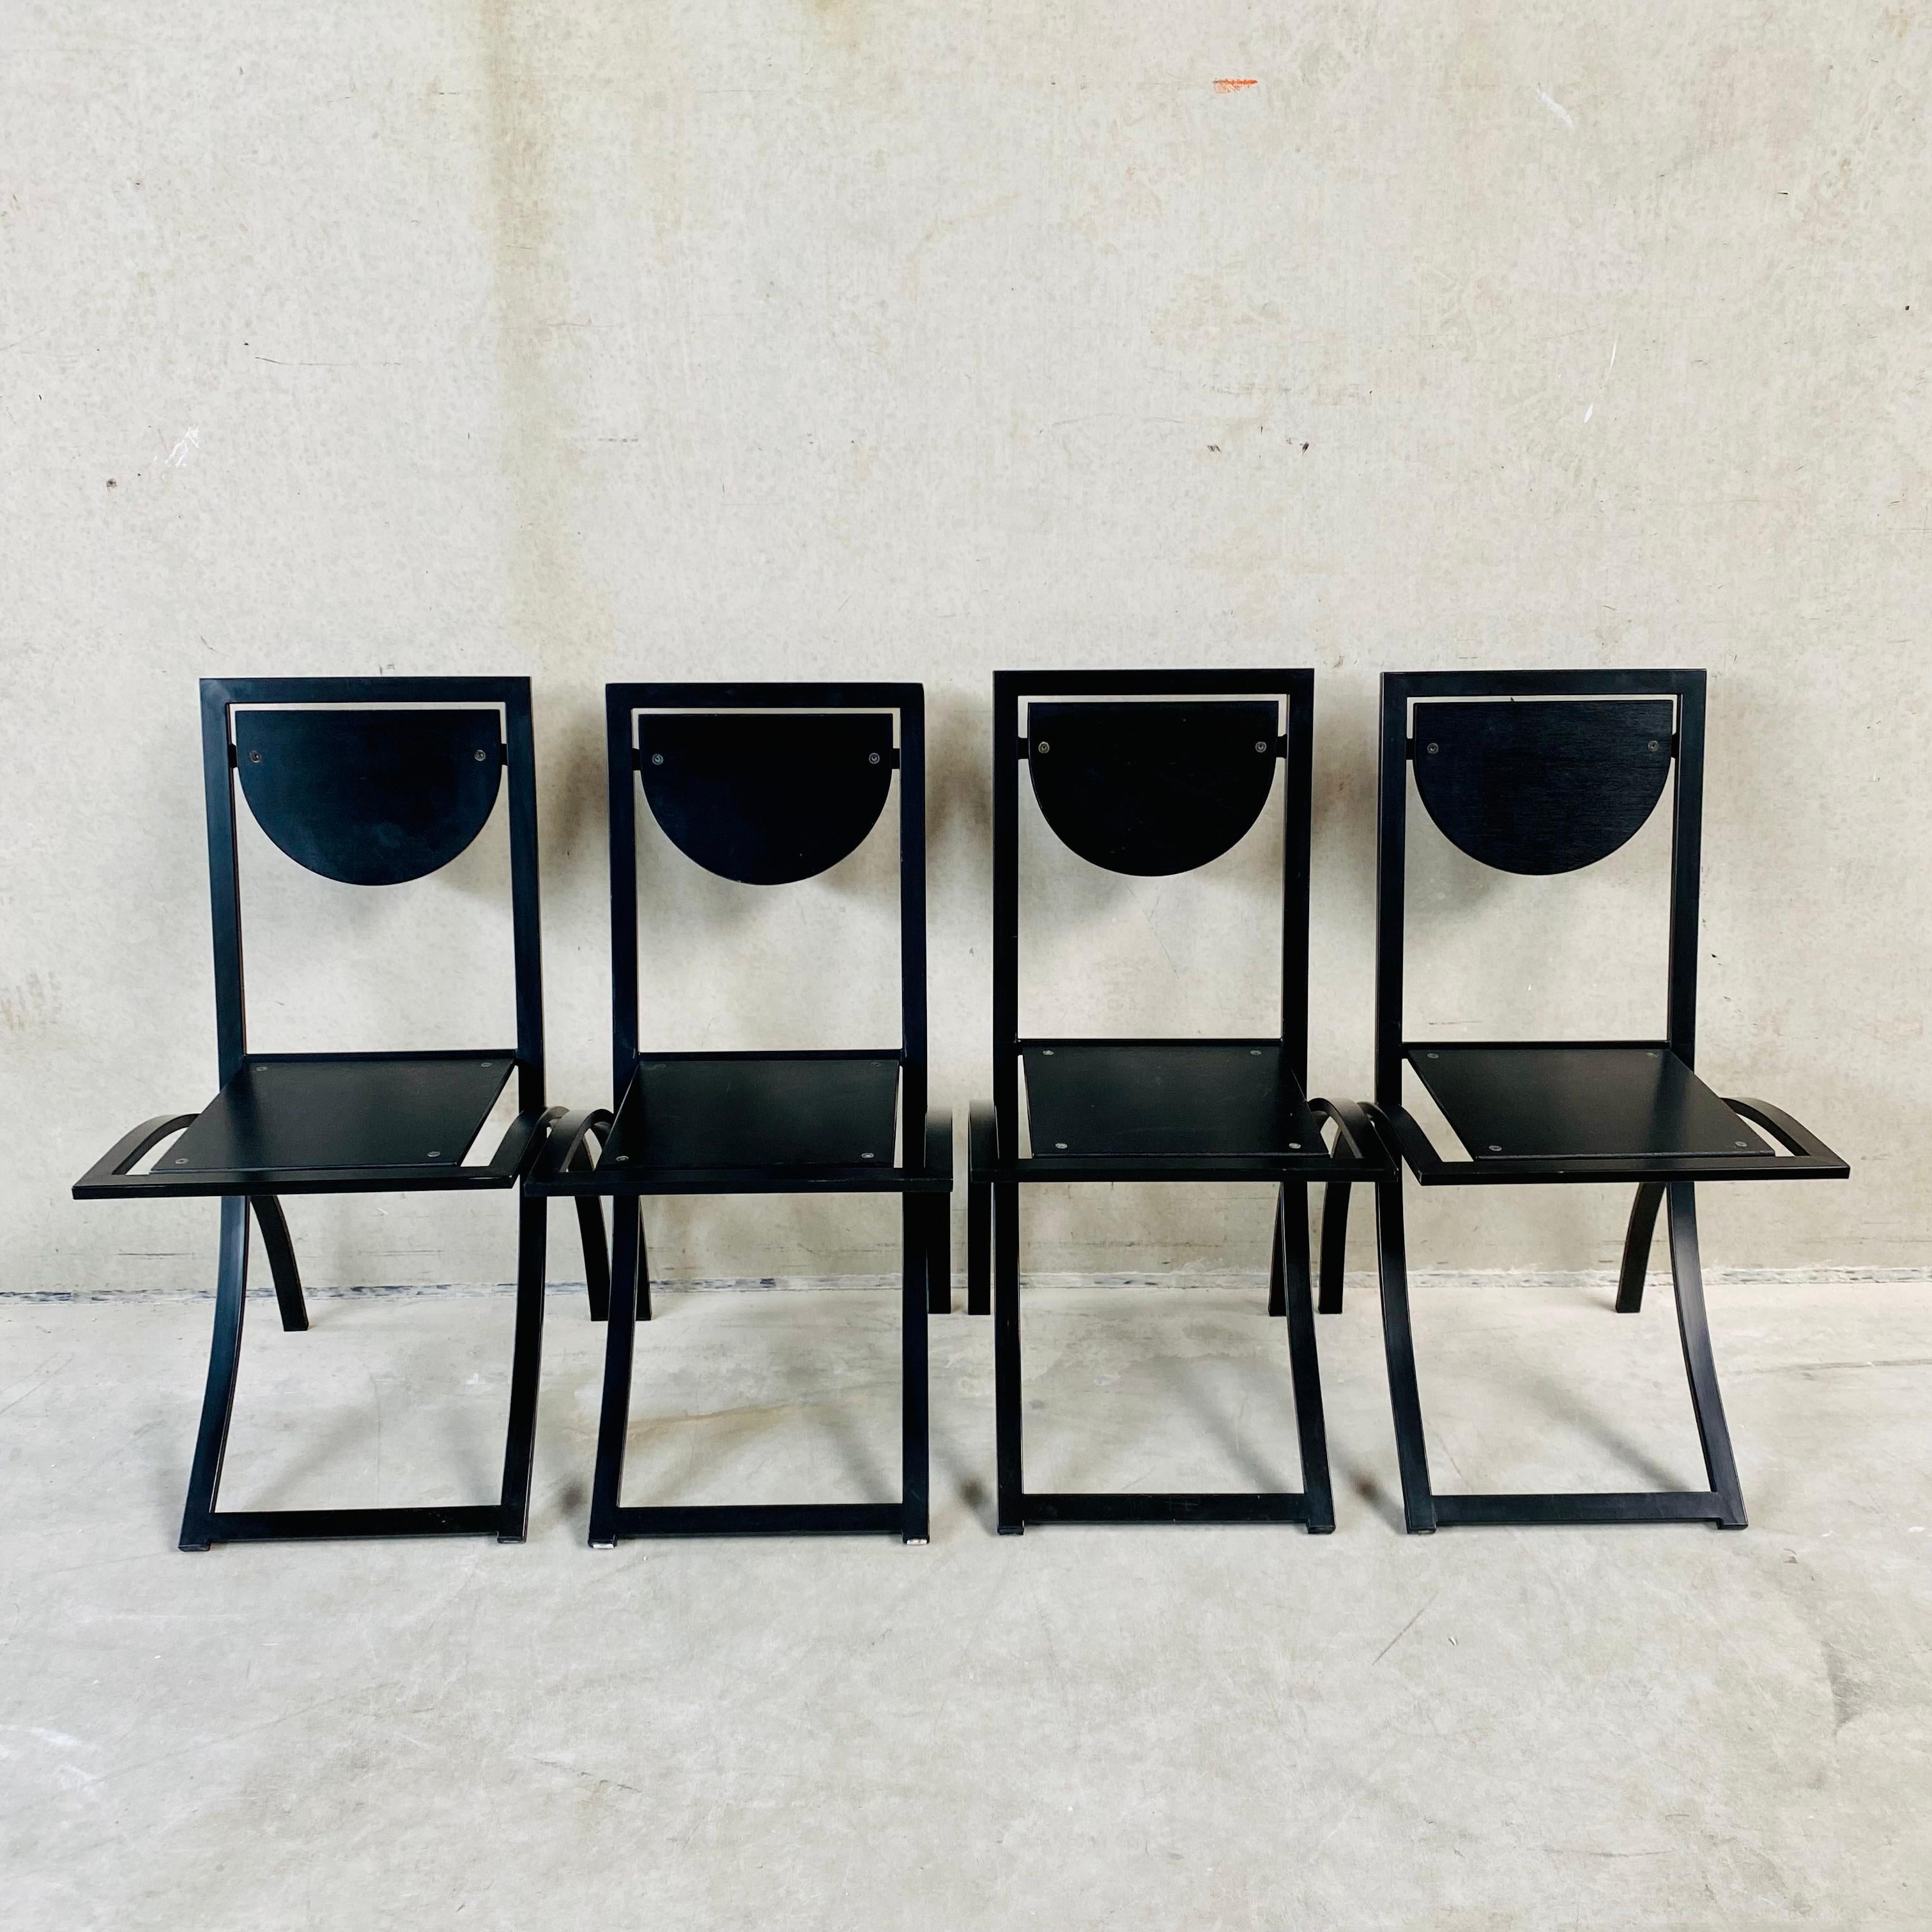 4 x KFF Black Smoked Oak Dining Chairs by Karl Friedrich Förster 1980 For Sale 3